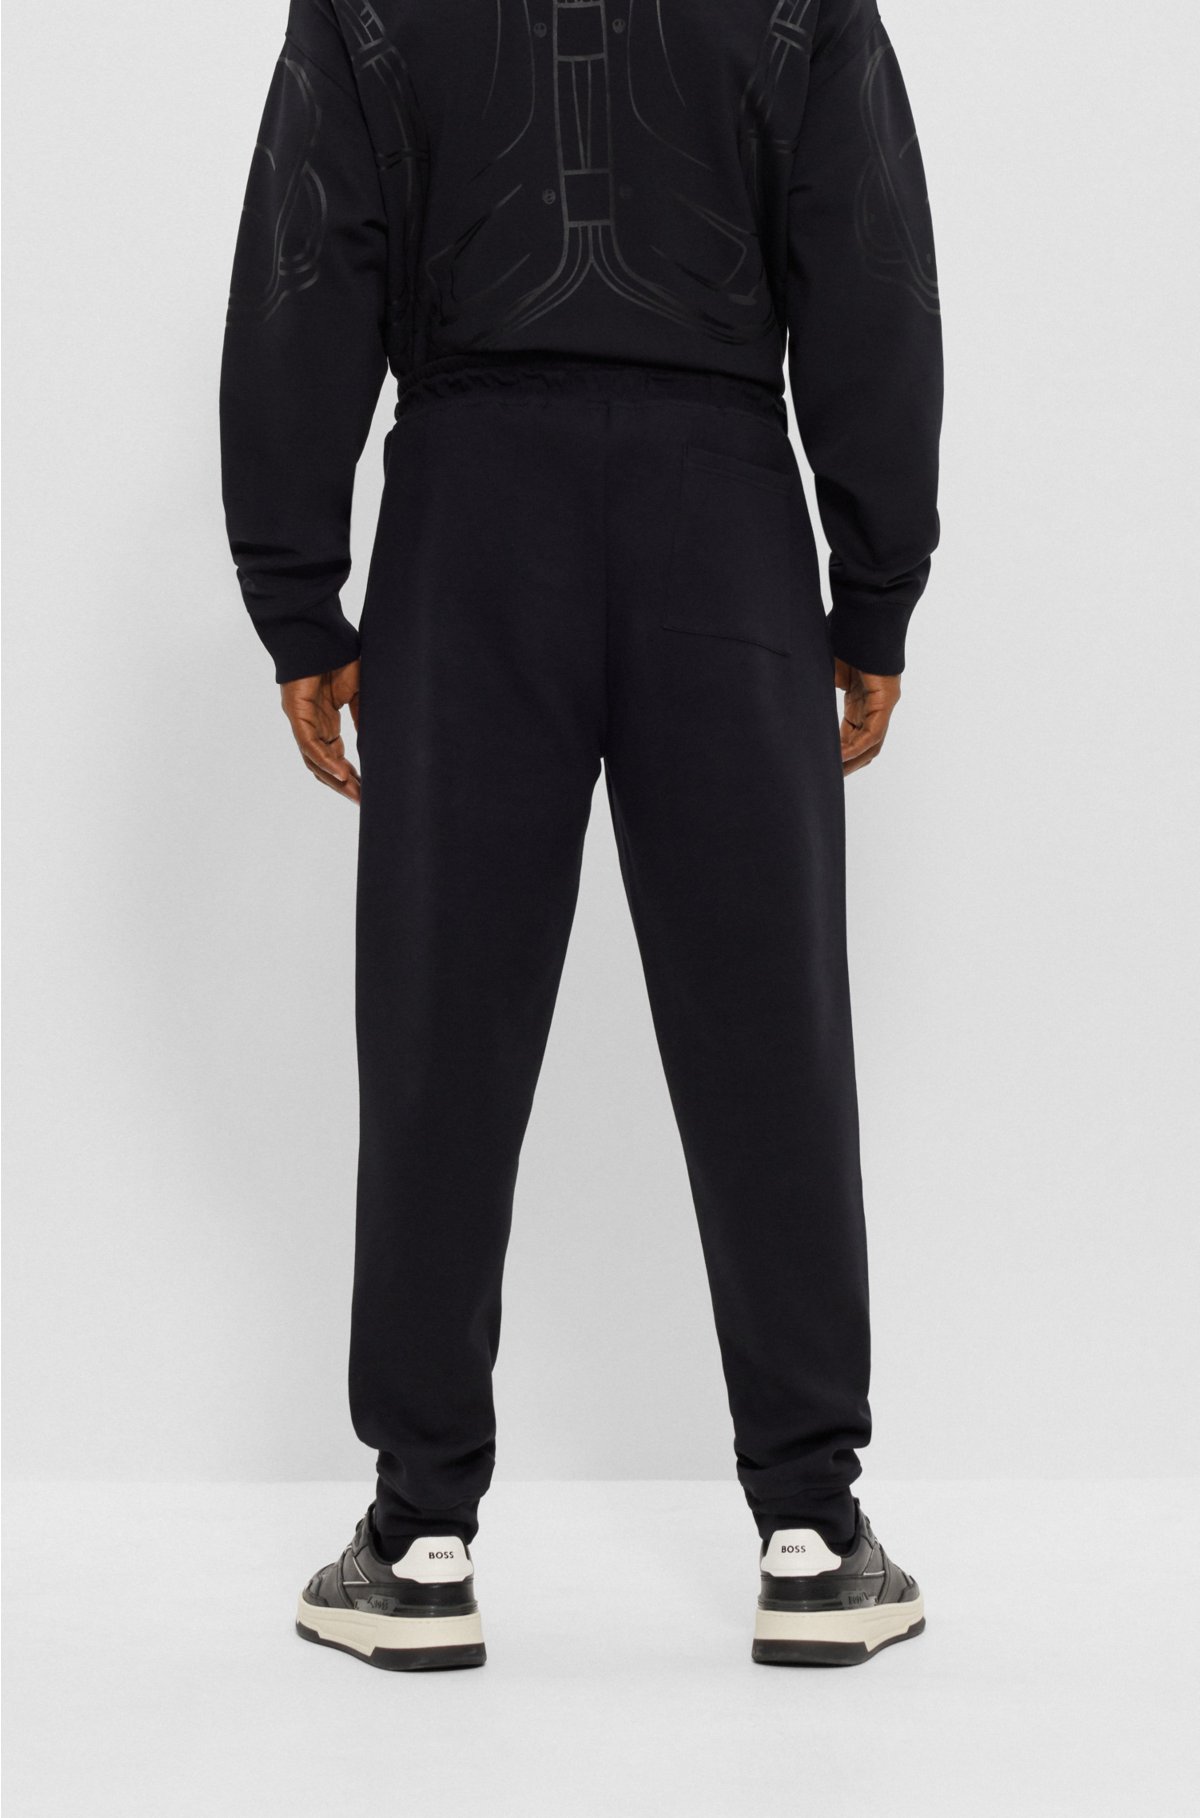 BOSS x NFL cotton-blend tracksuit bottoms with collaborative branding, Giants